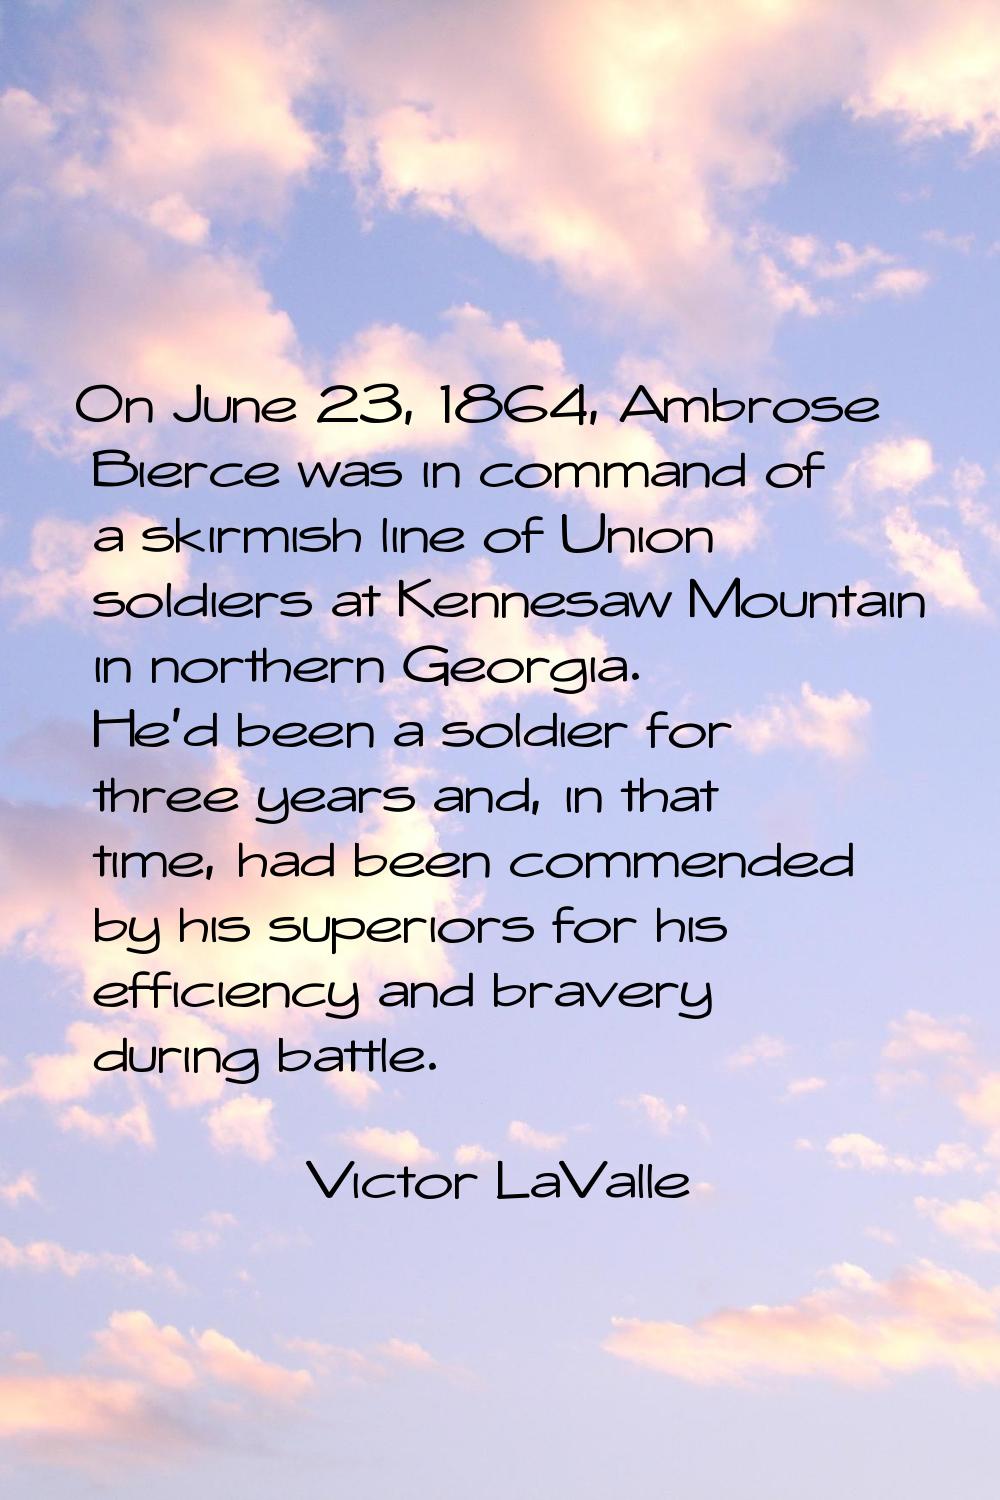 On June 23, 1864, Ambrose Bierce was in command of a skirmish line of Union soldiers at Kennesaw Mo